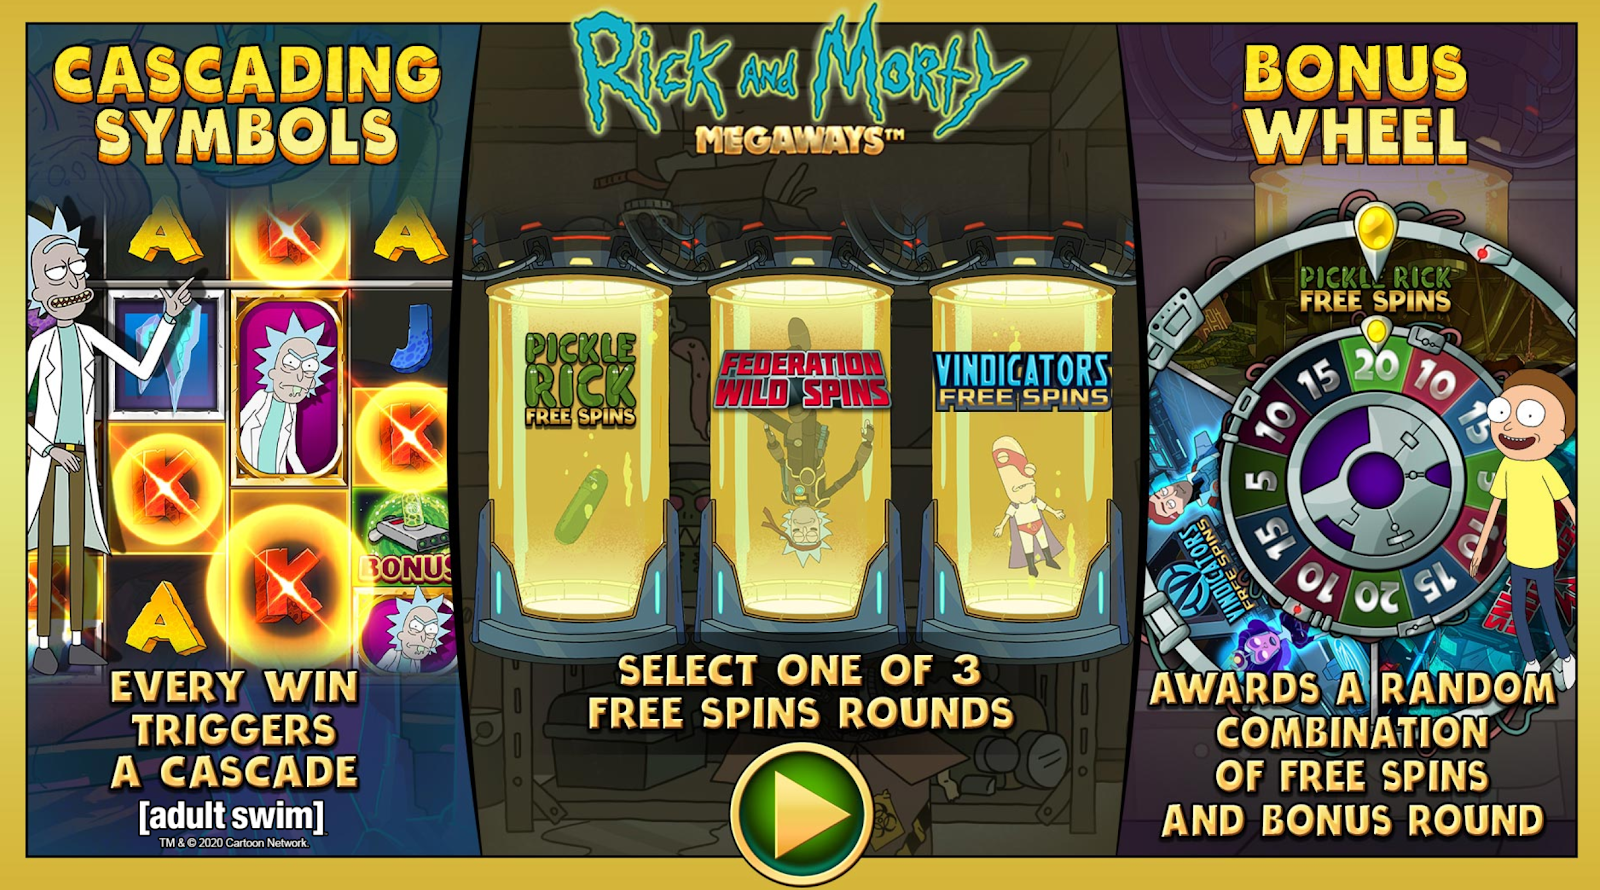 Rick and Morty Megaways is one of the best slot games you can play at Grosvenor Casinos 